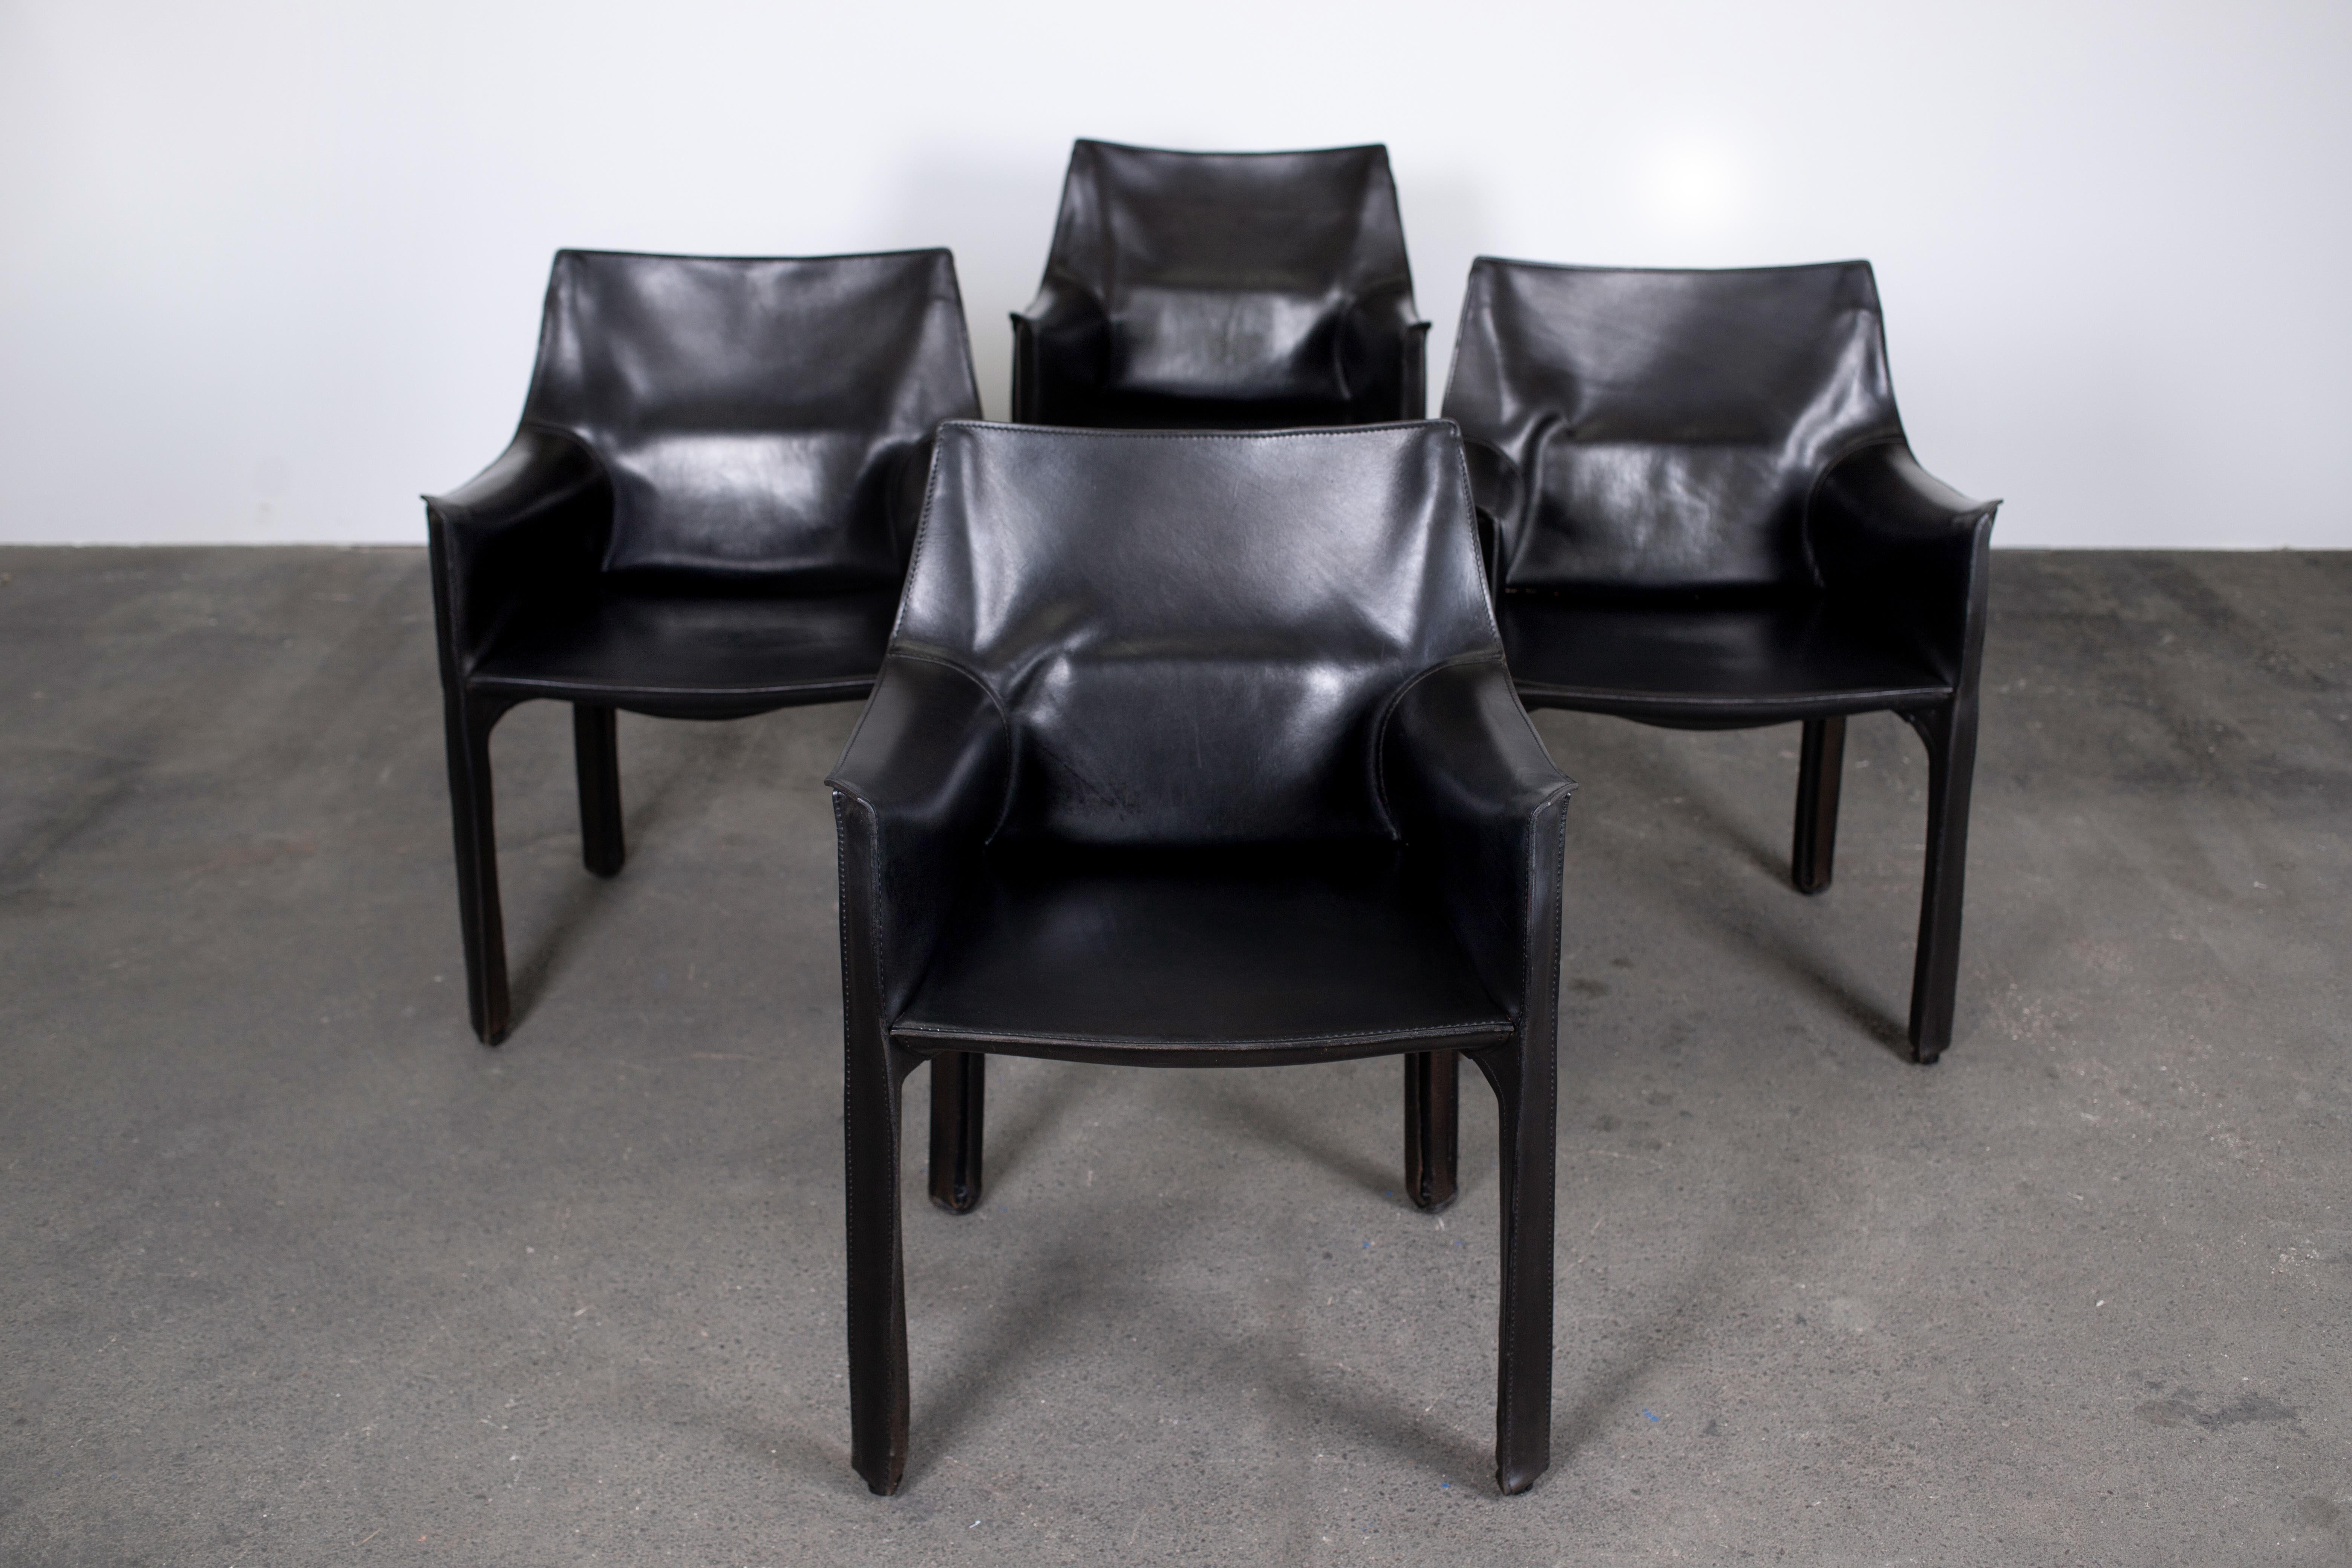 Set of original 4 Mario Bellini CAB 413 chairs, made by Cassina. Flexible steel frame covered with a skin of high quality vintage black saddle leather. The chairs were situated with their backs facing a window for several decades. Consequently, the